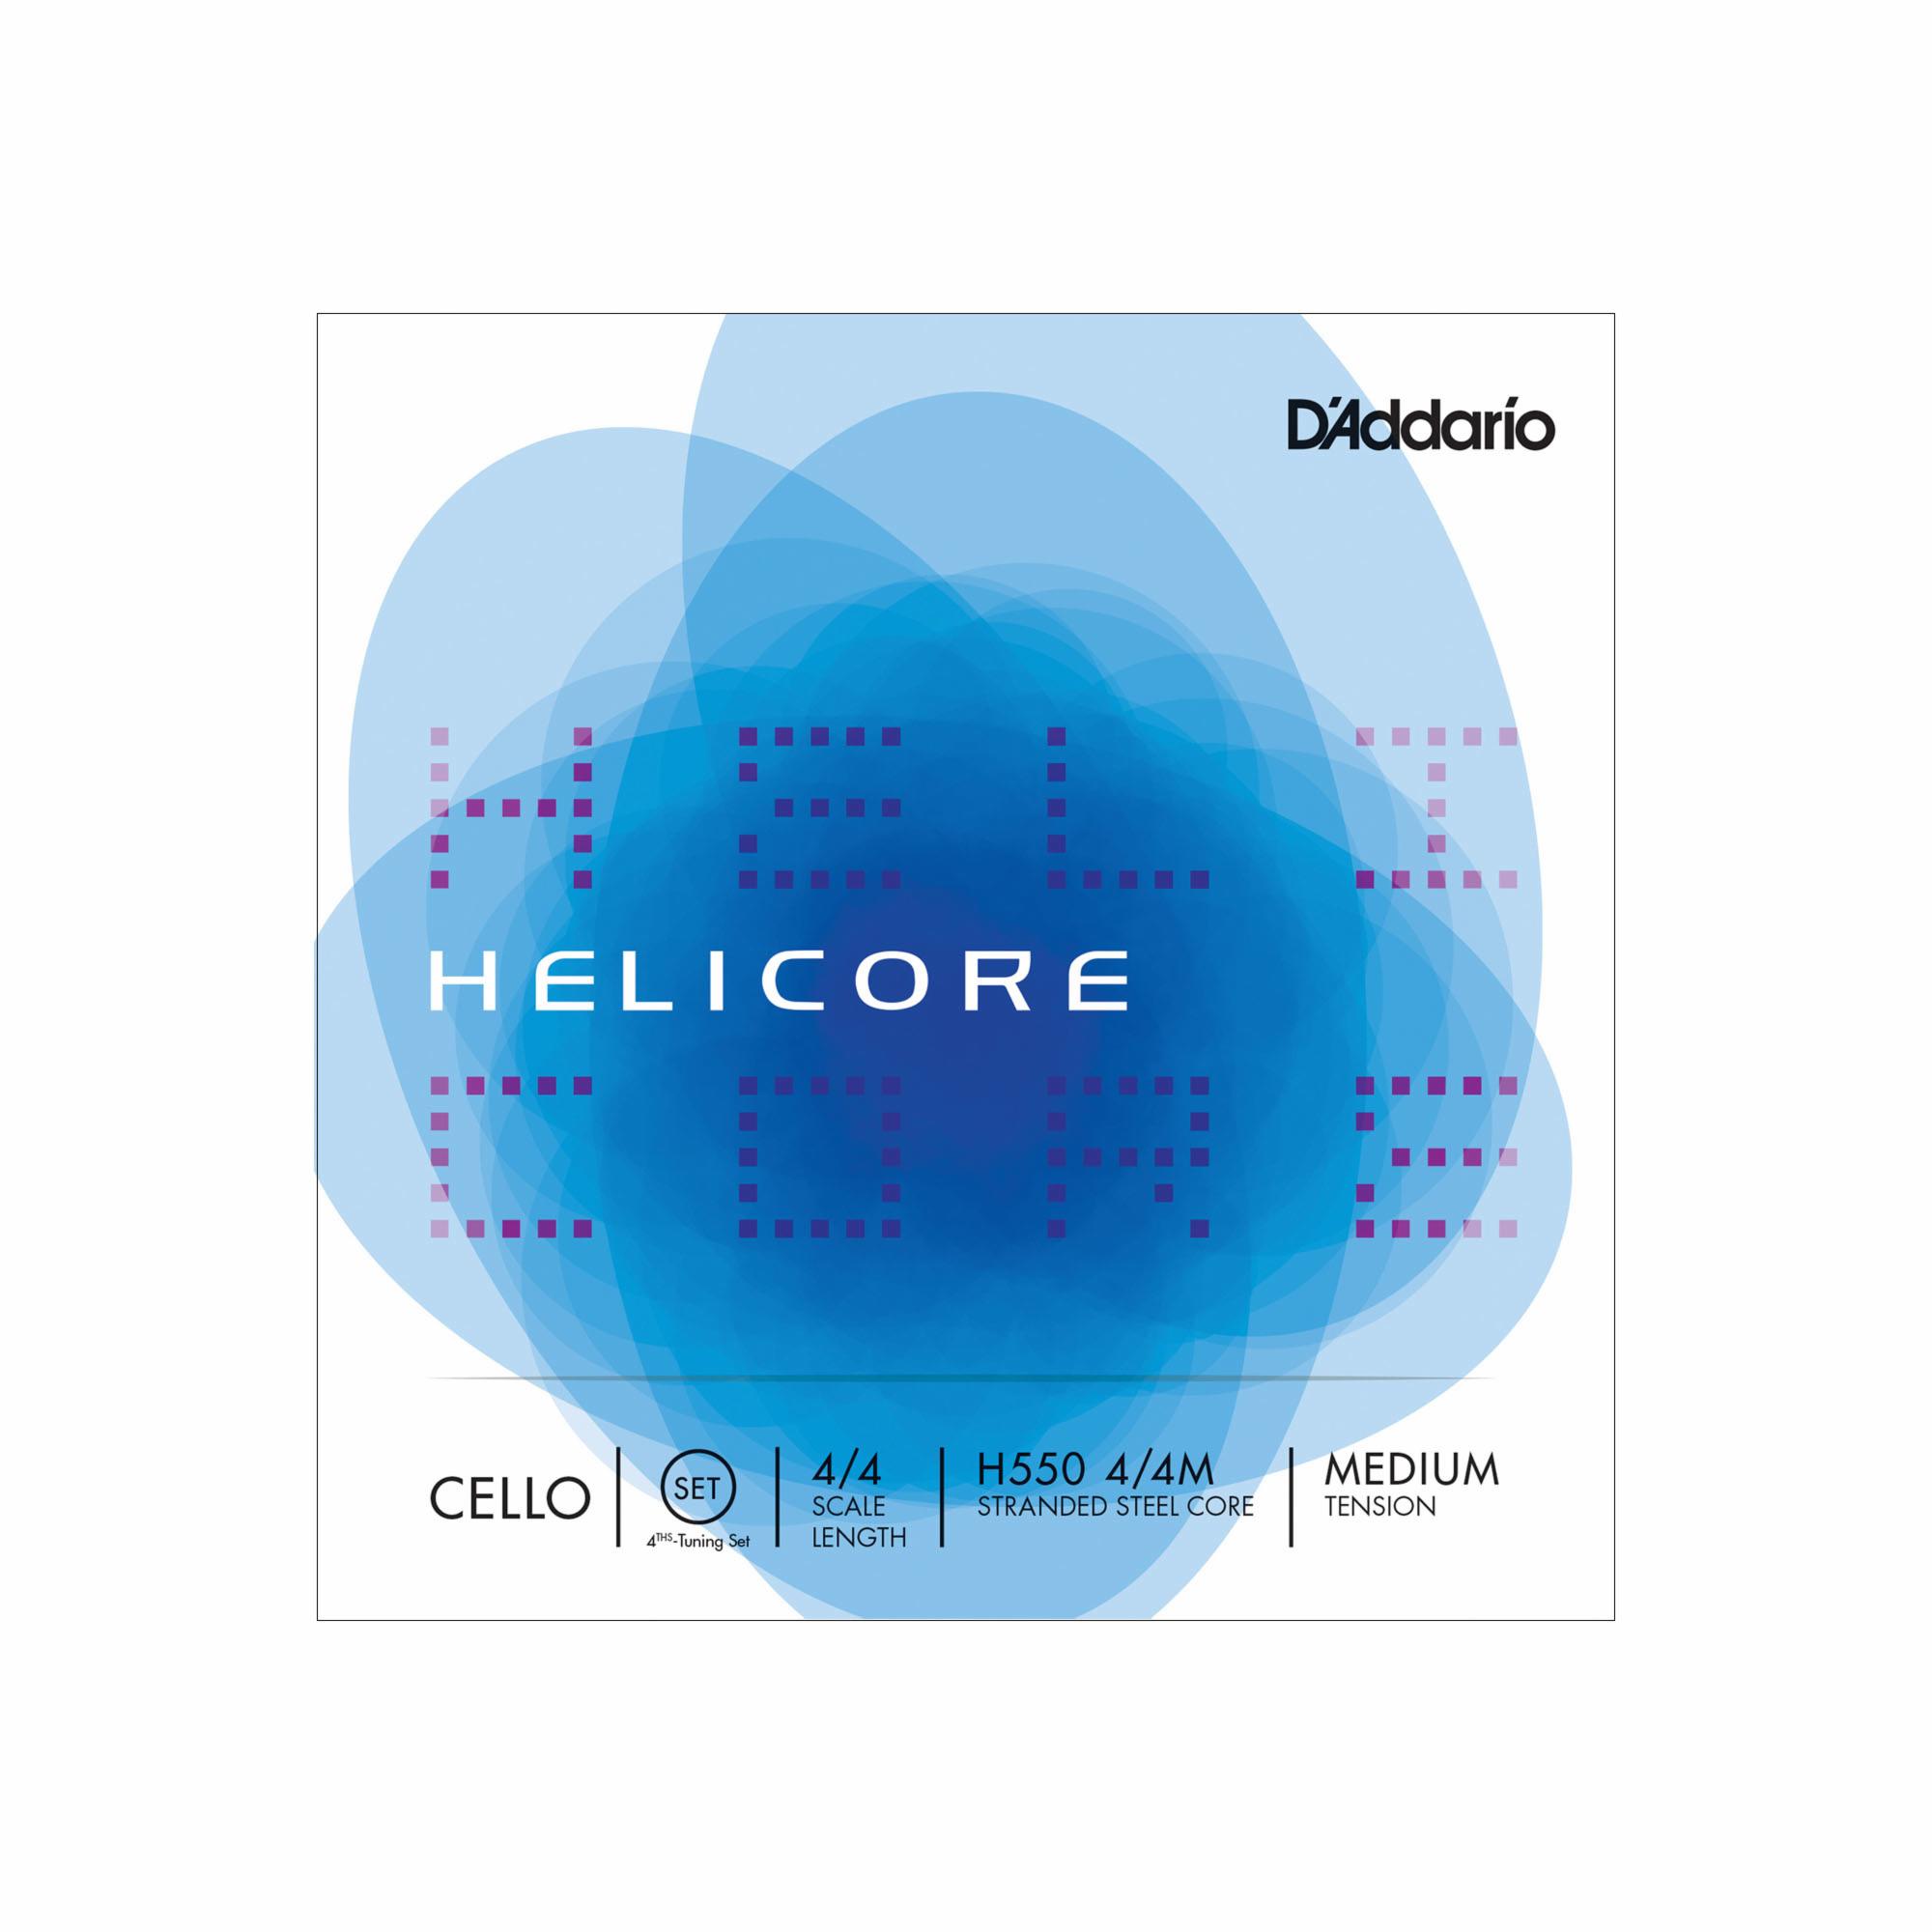 D'Addario Helicore Fourths-Tuning Cello Strings